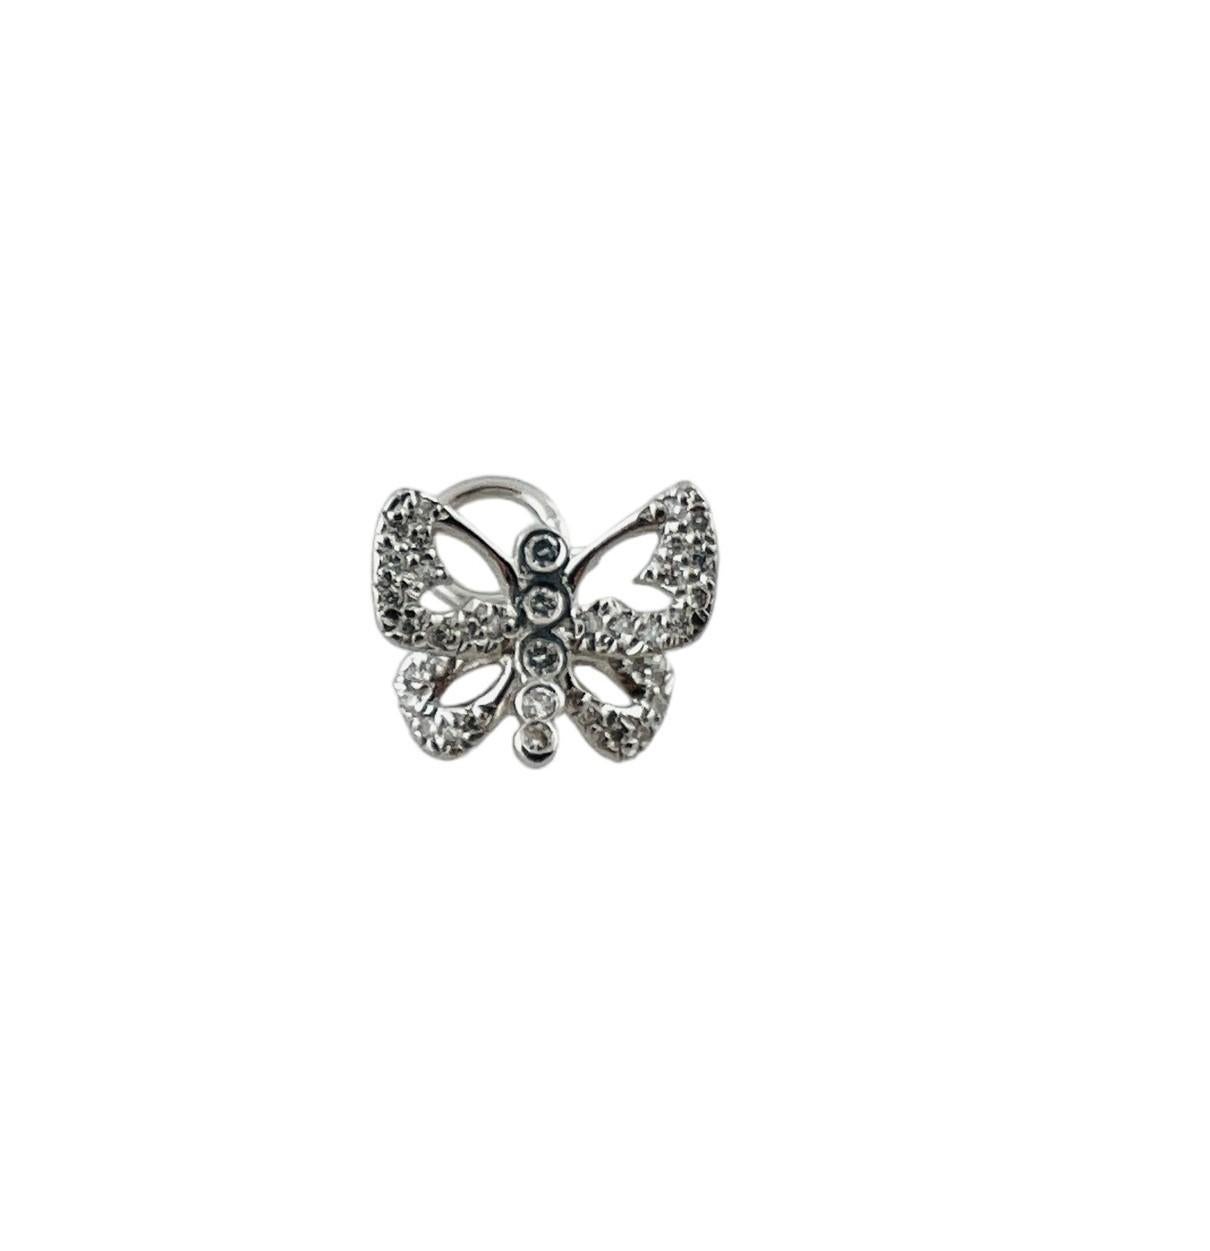 Roberto Coin 18 Karat White Gold and Diamond Butterfly Pendant-

This sparkling butterfly charm features 37 round brilliant cut diamonds set in classic 18K white gold. Roberto Coin trademark ruby on back.

Approximate total diamond weight: .38